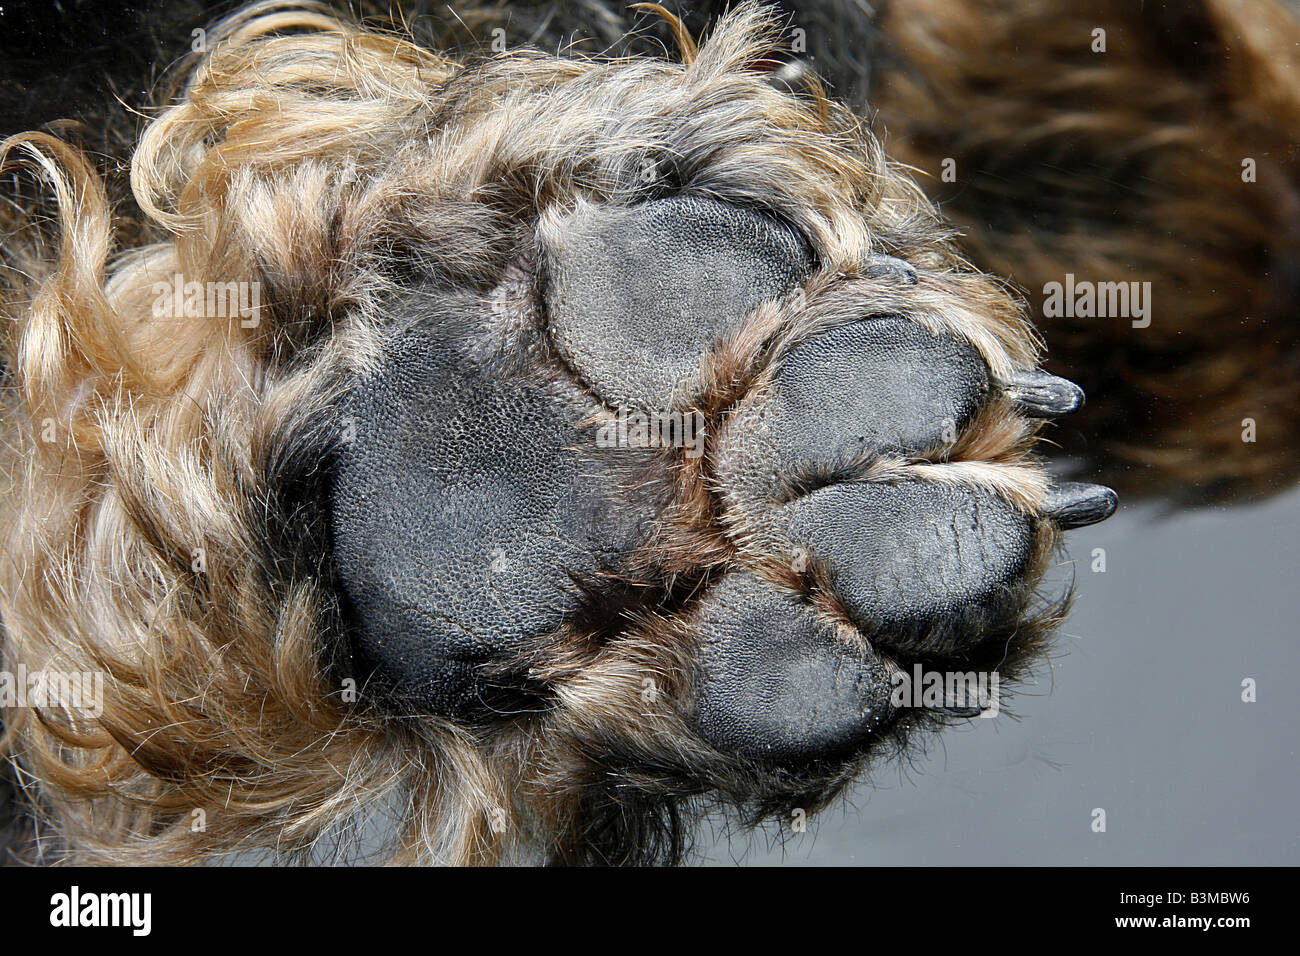 Underside Of Paw High Resolution Stock Photography and Images - Alamy